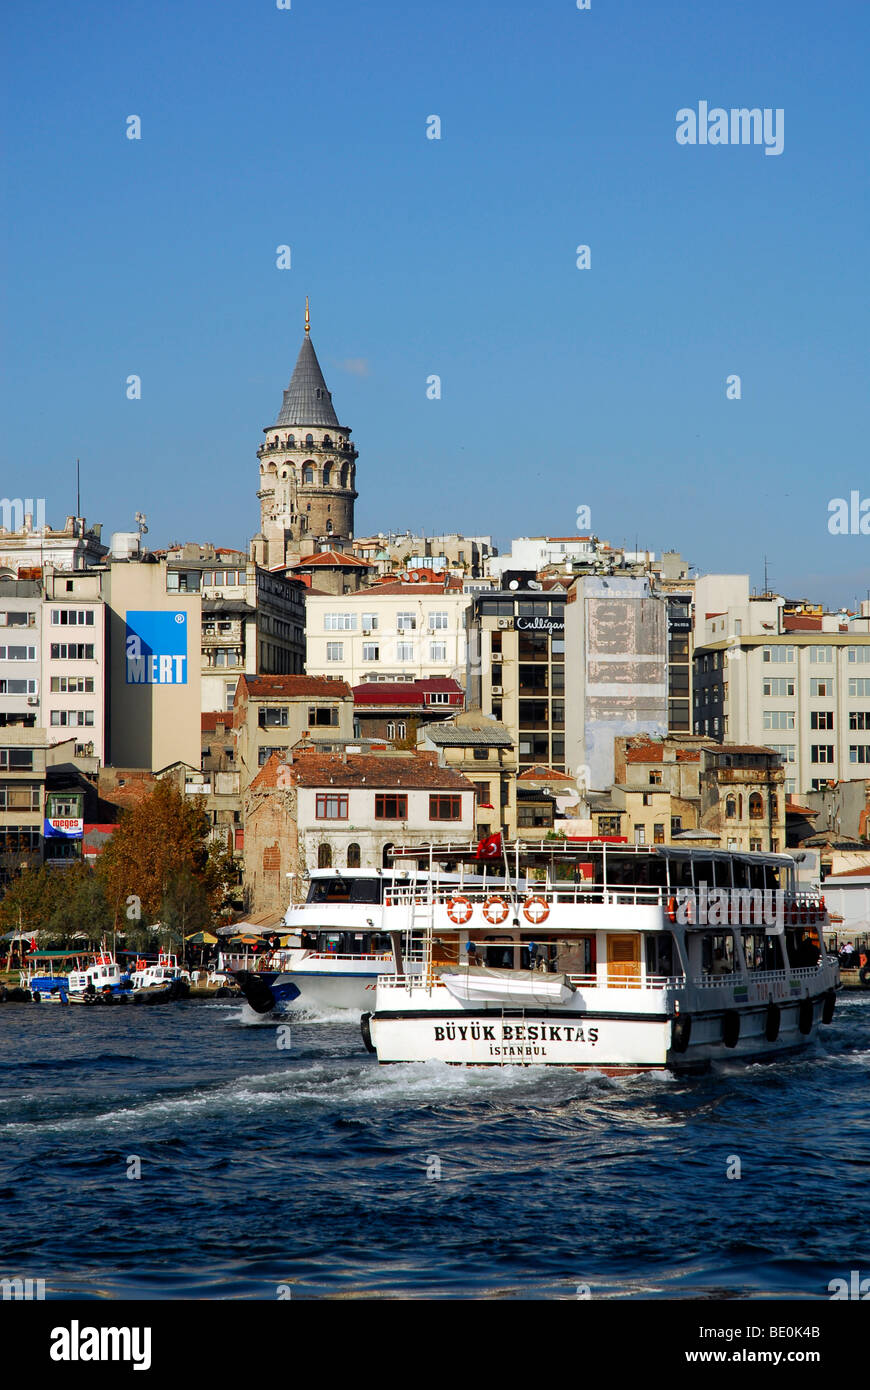 View from the Galata bridge, Galata Koepruesue on a harbor ferry and the Galata Tower, Golden Horn, Halic, Istanbul, Turkey Stock Photo